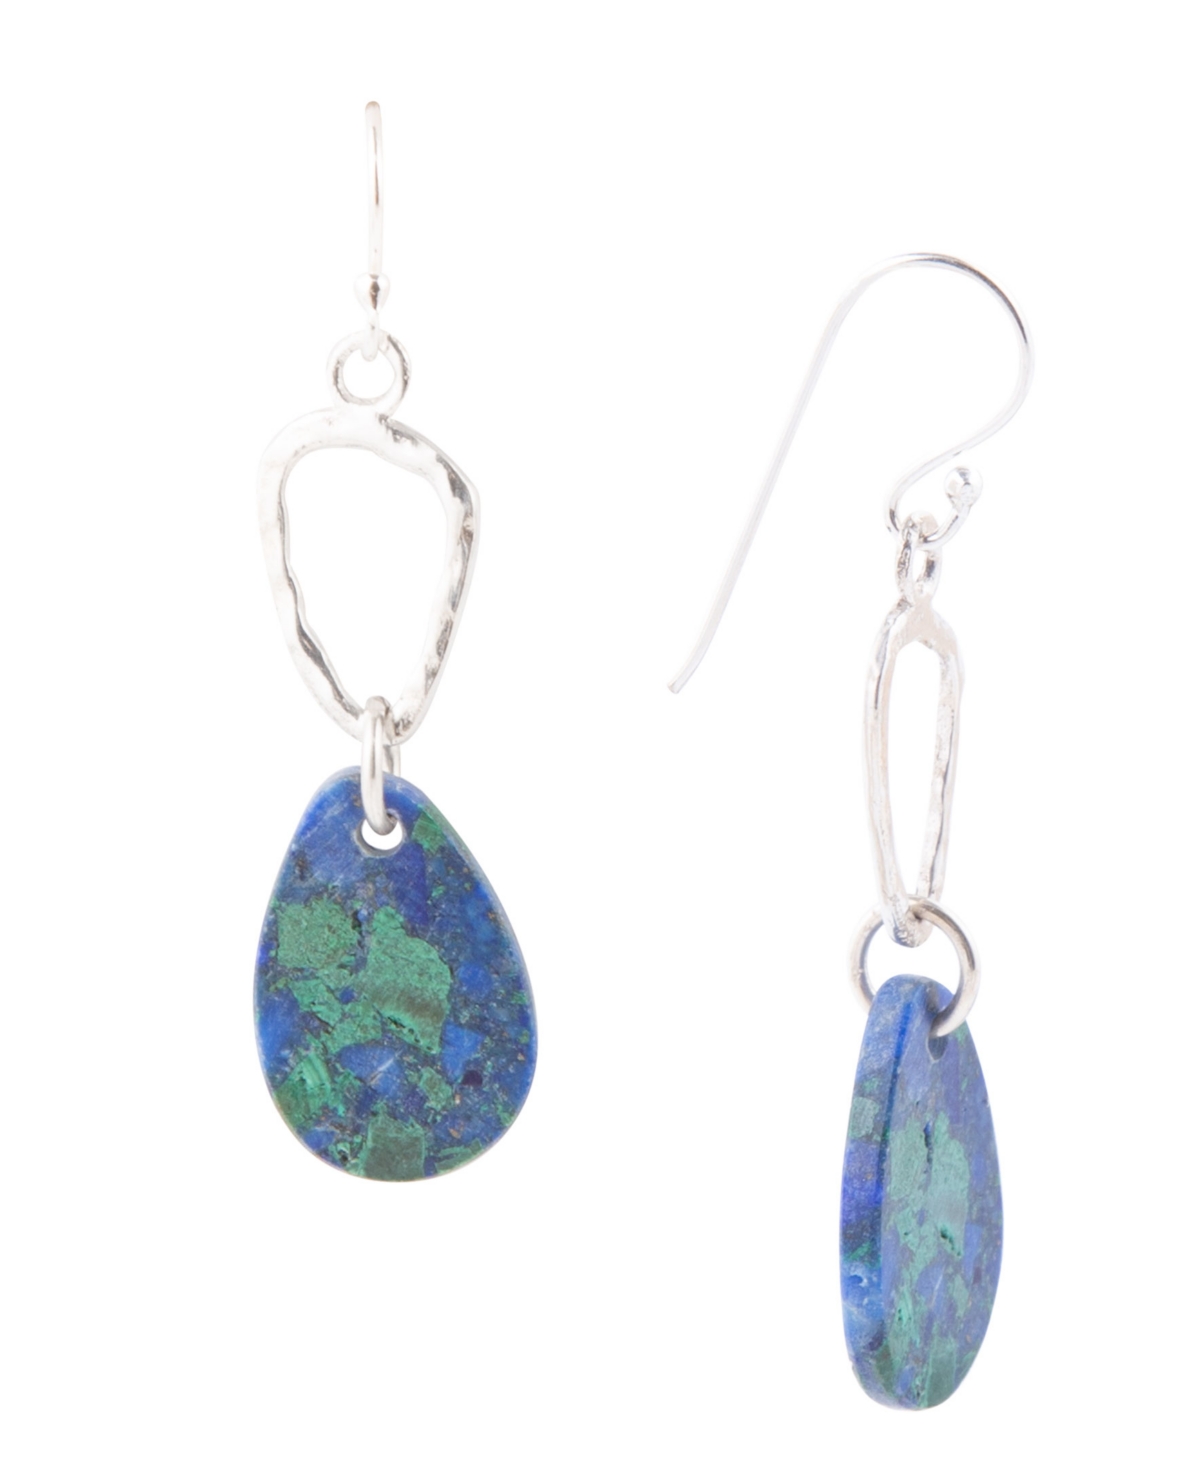 Barse Rose Sterling Silver And Genuine Azurite Drop Earrings